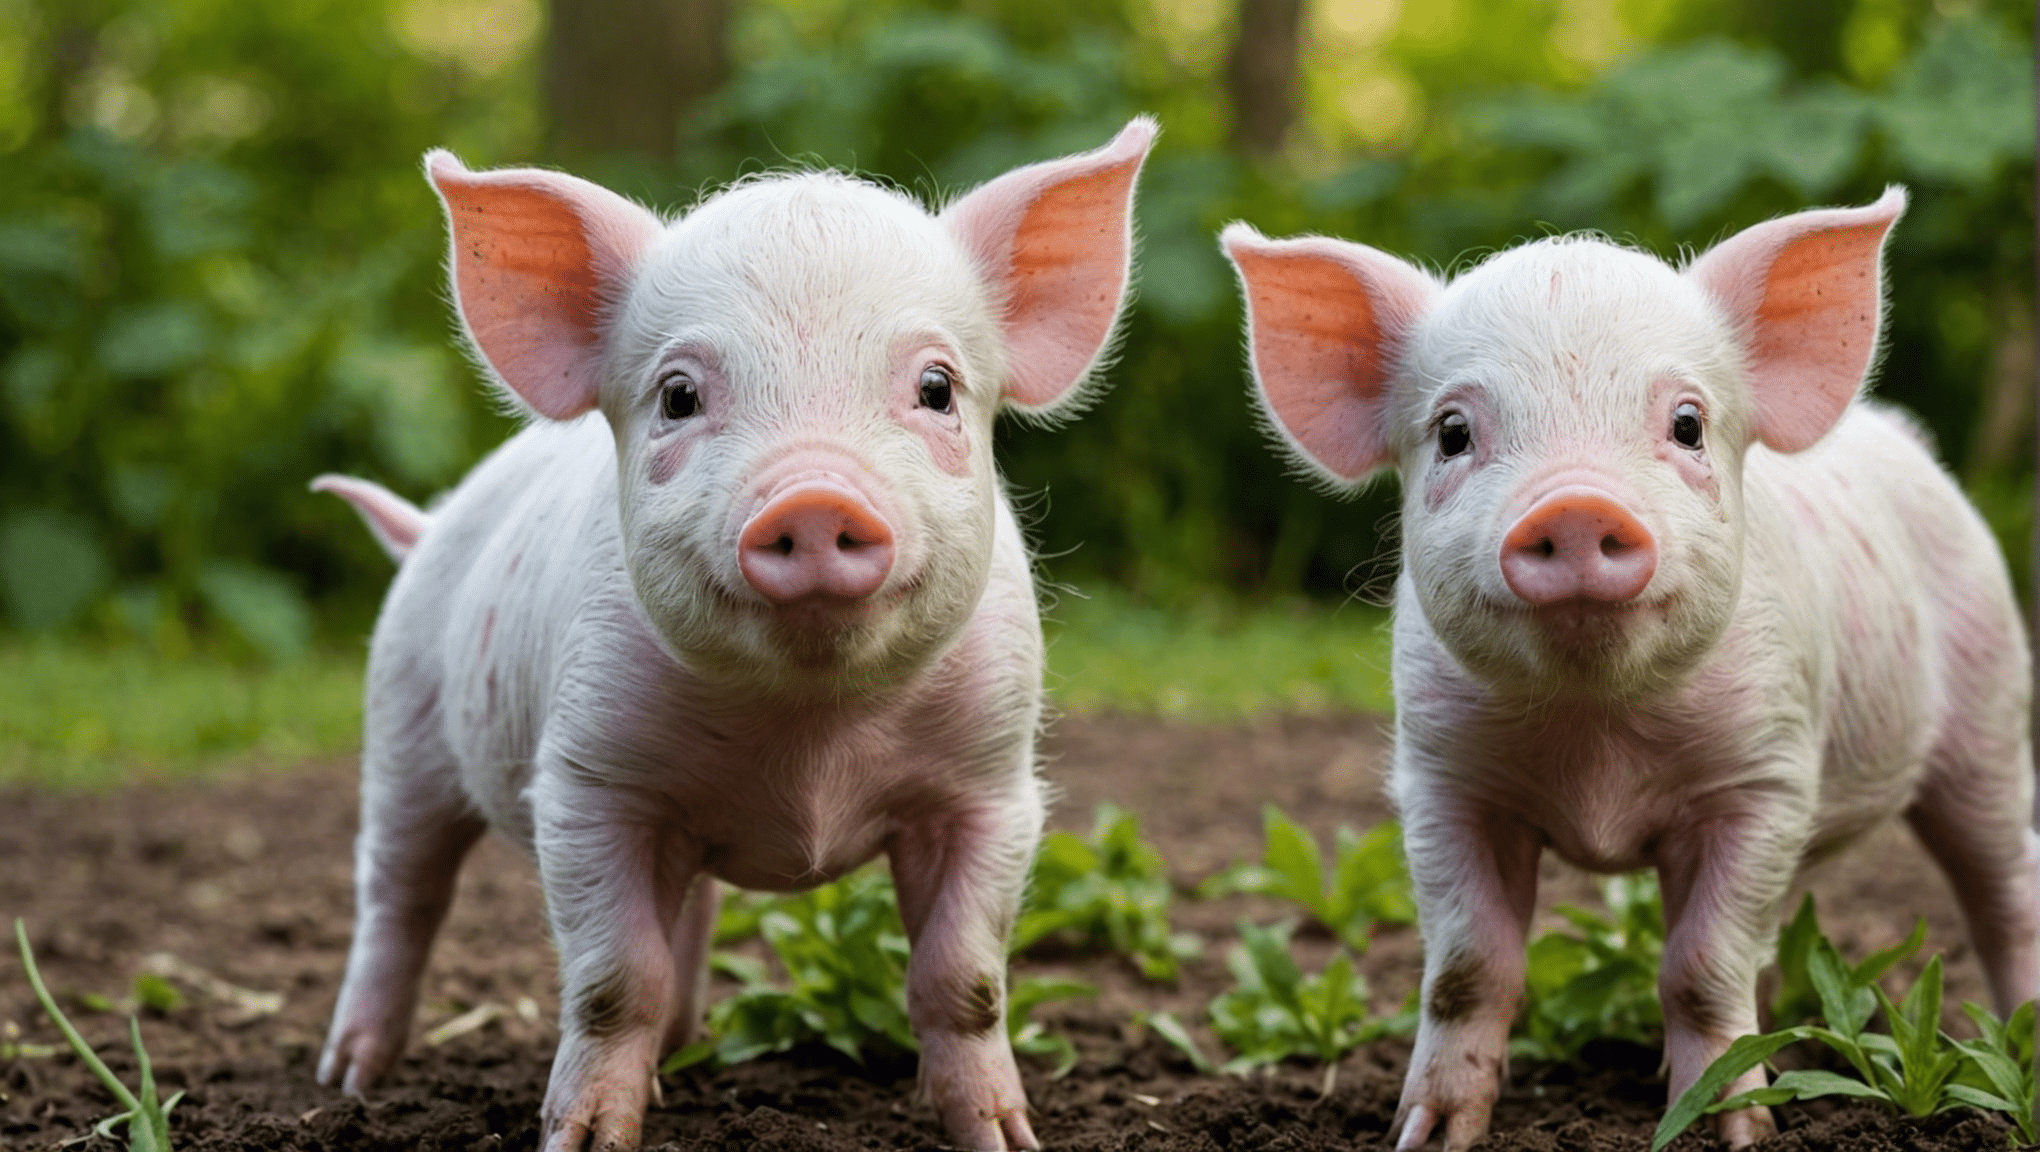 discover adorable and charming names for newborn piglets in this delightful guide. find the perfect moniker for your little piglet and make a lasting impression.